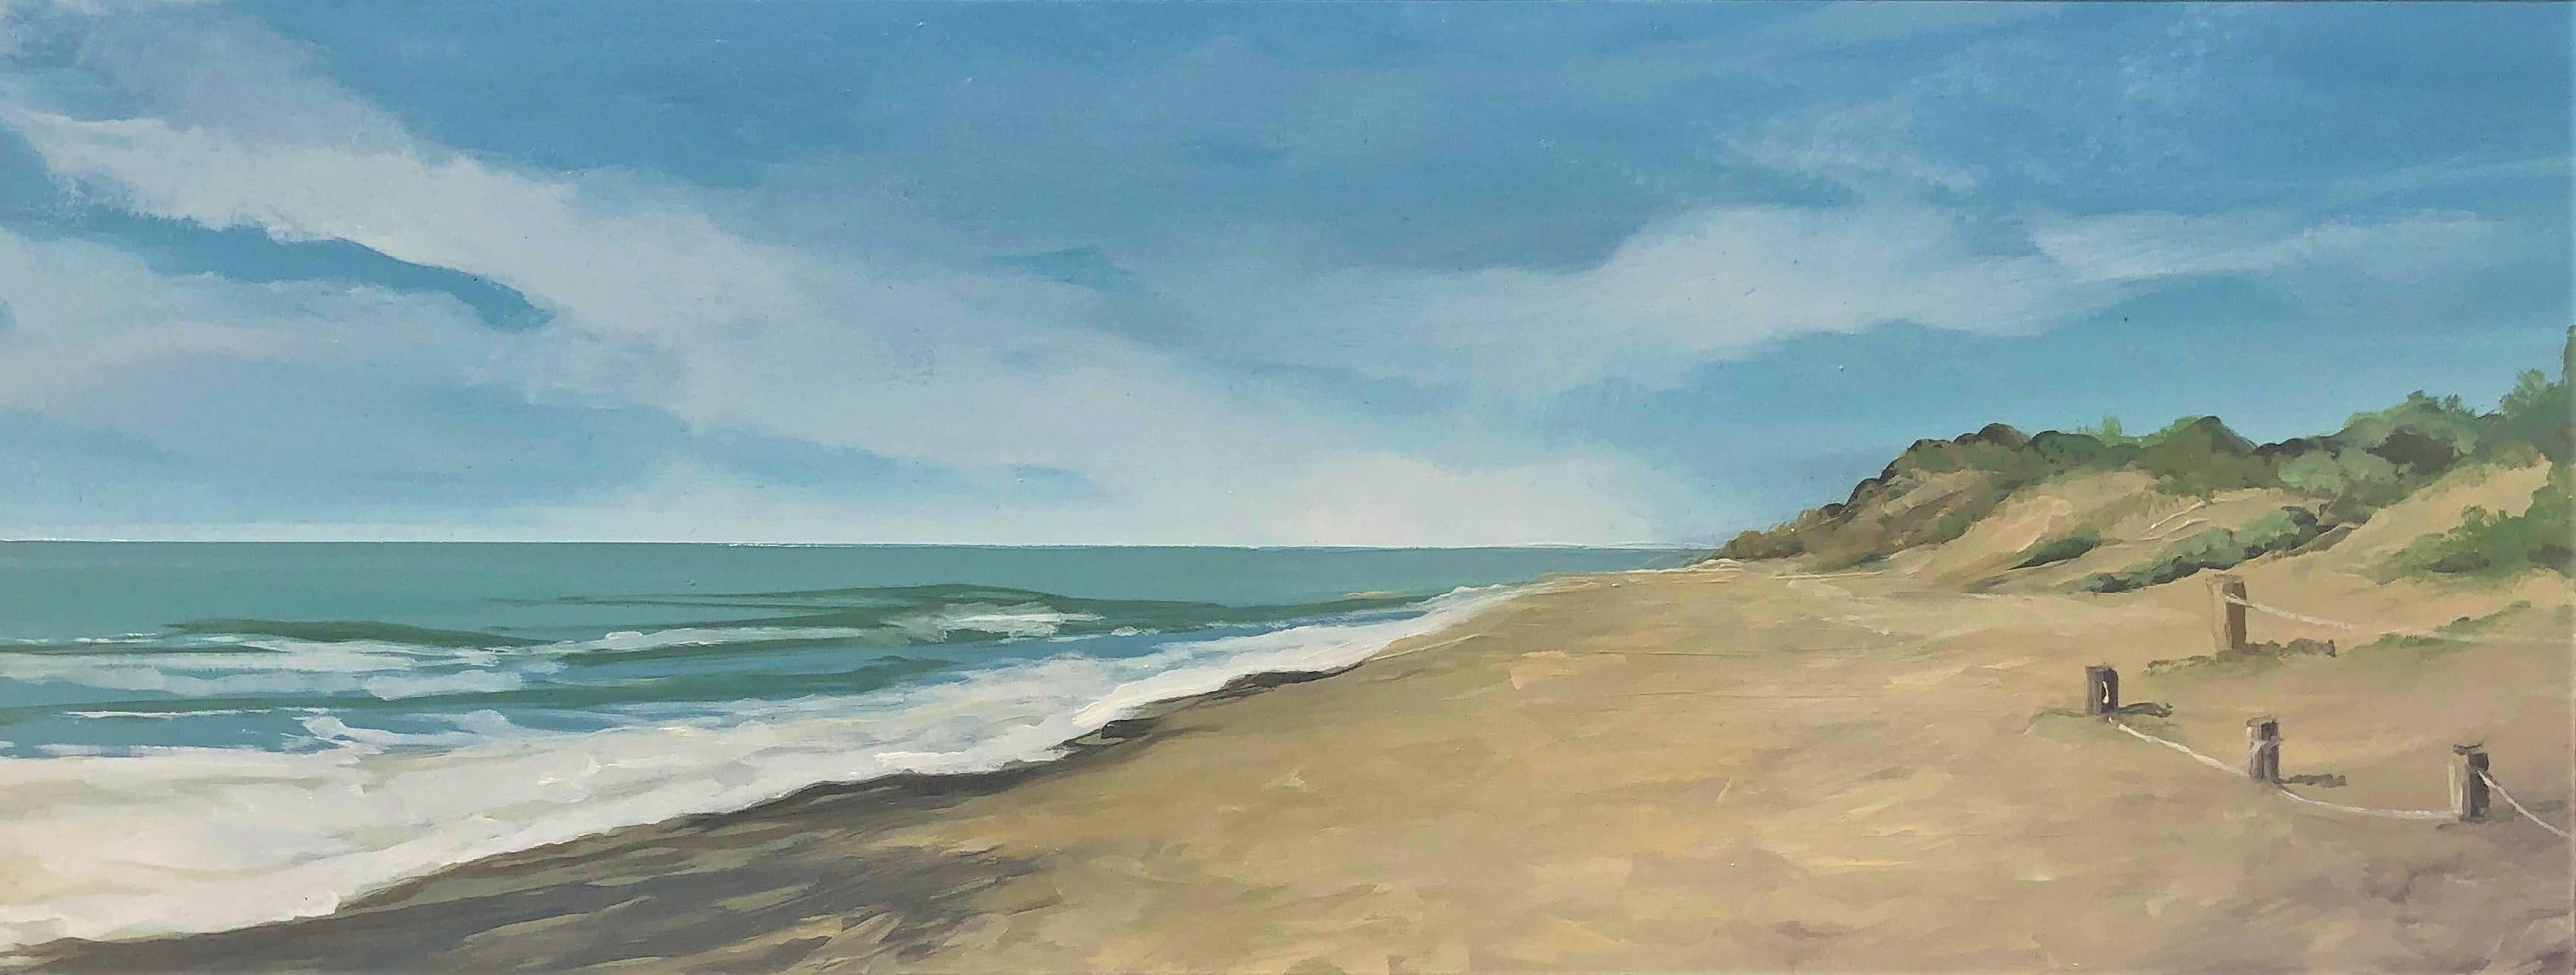 Beach with dunes oil paint on board seascape